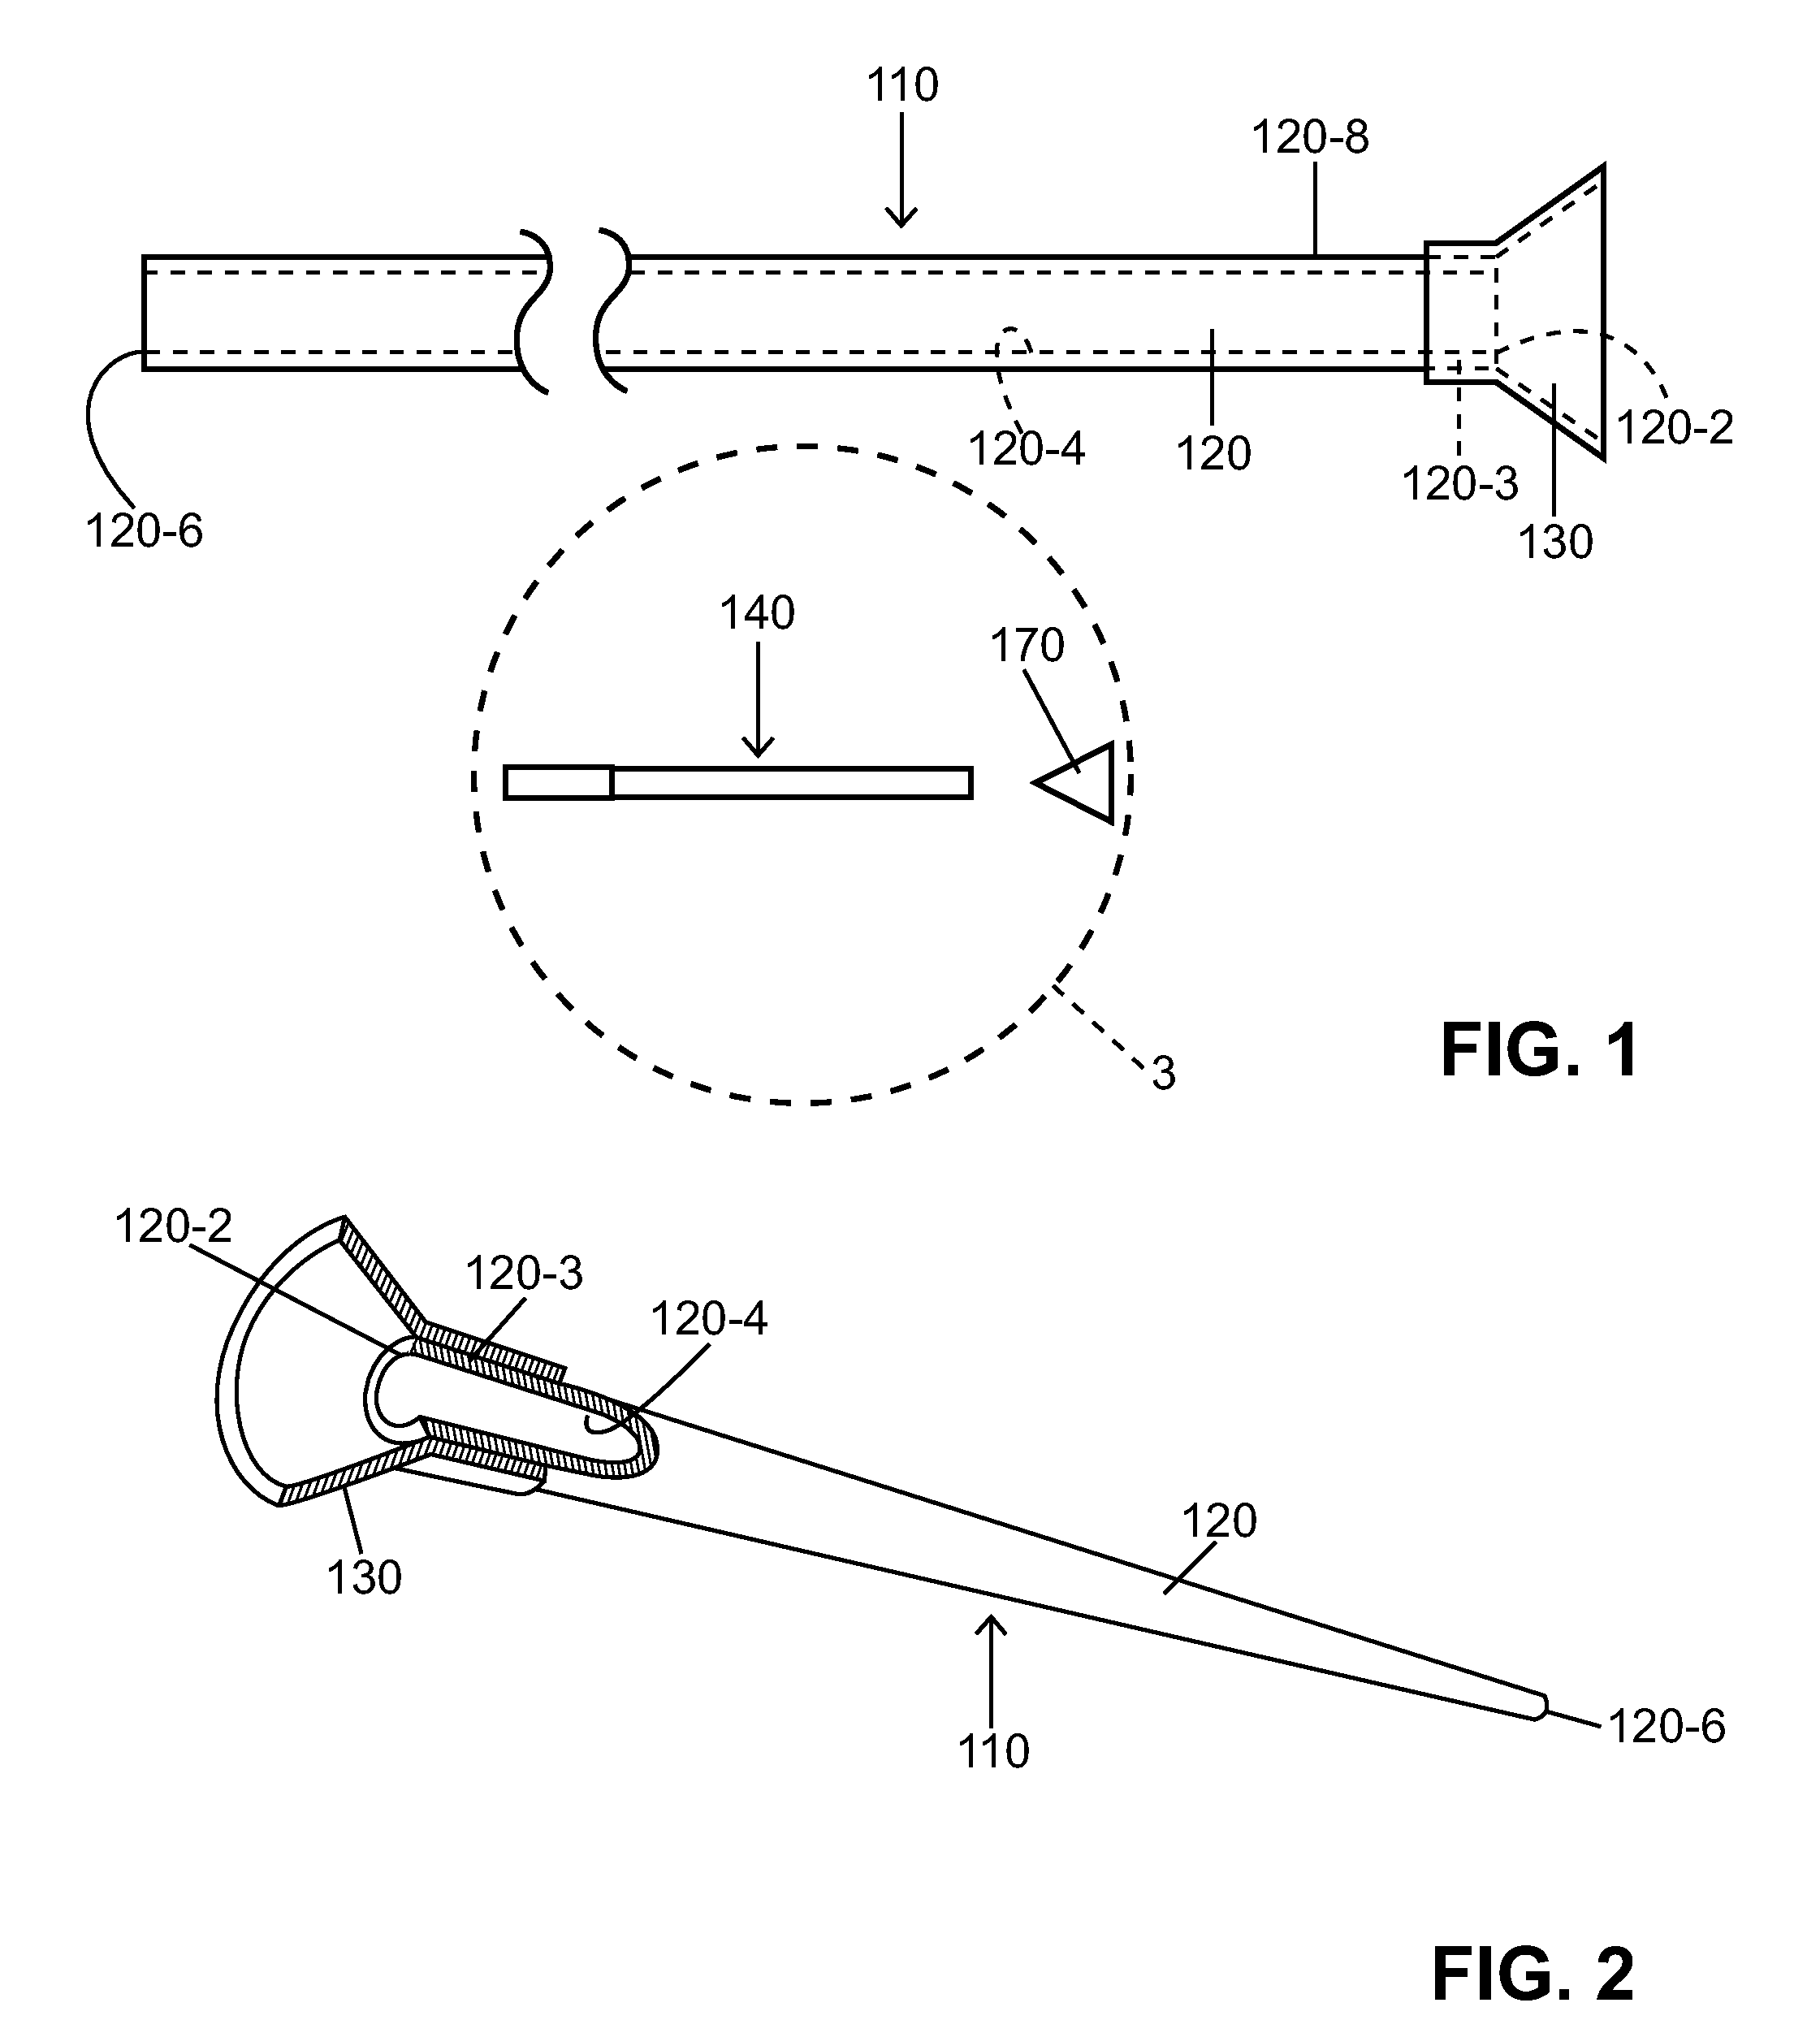 Apparatus for launching subcaliber projectiles at propellant operating pressures including the range of operating pressures that may be supplied by human breath